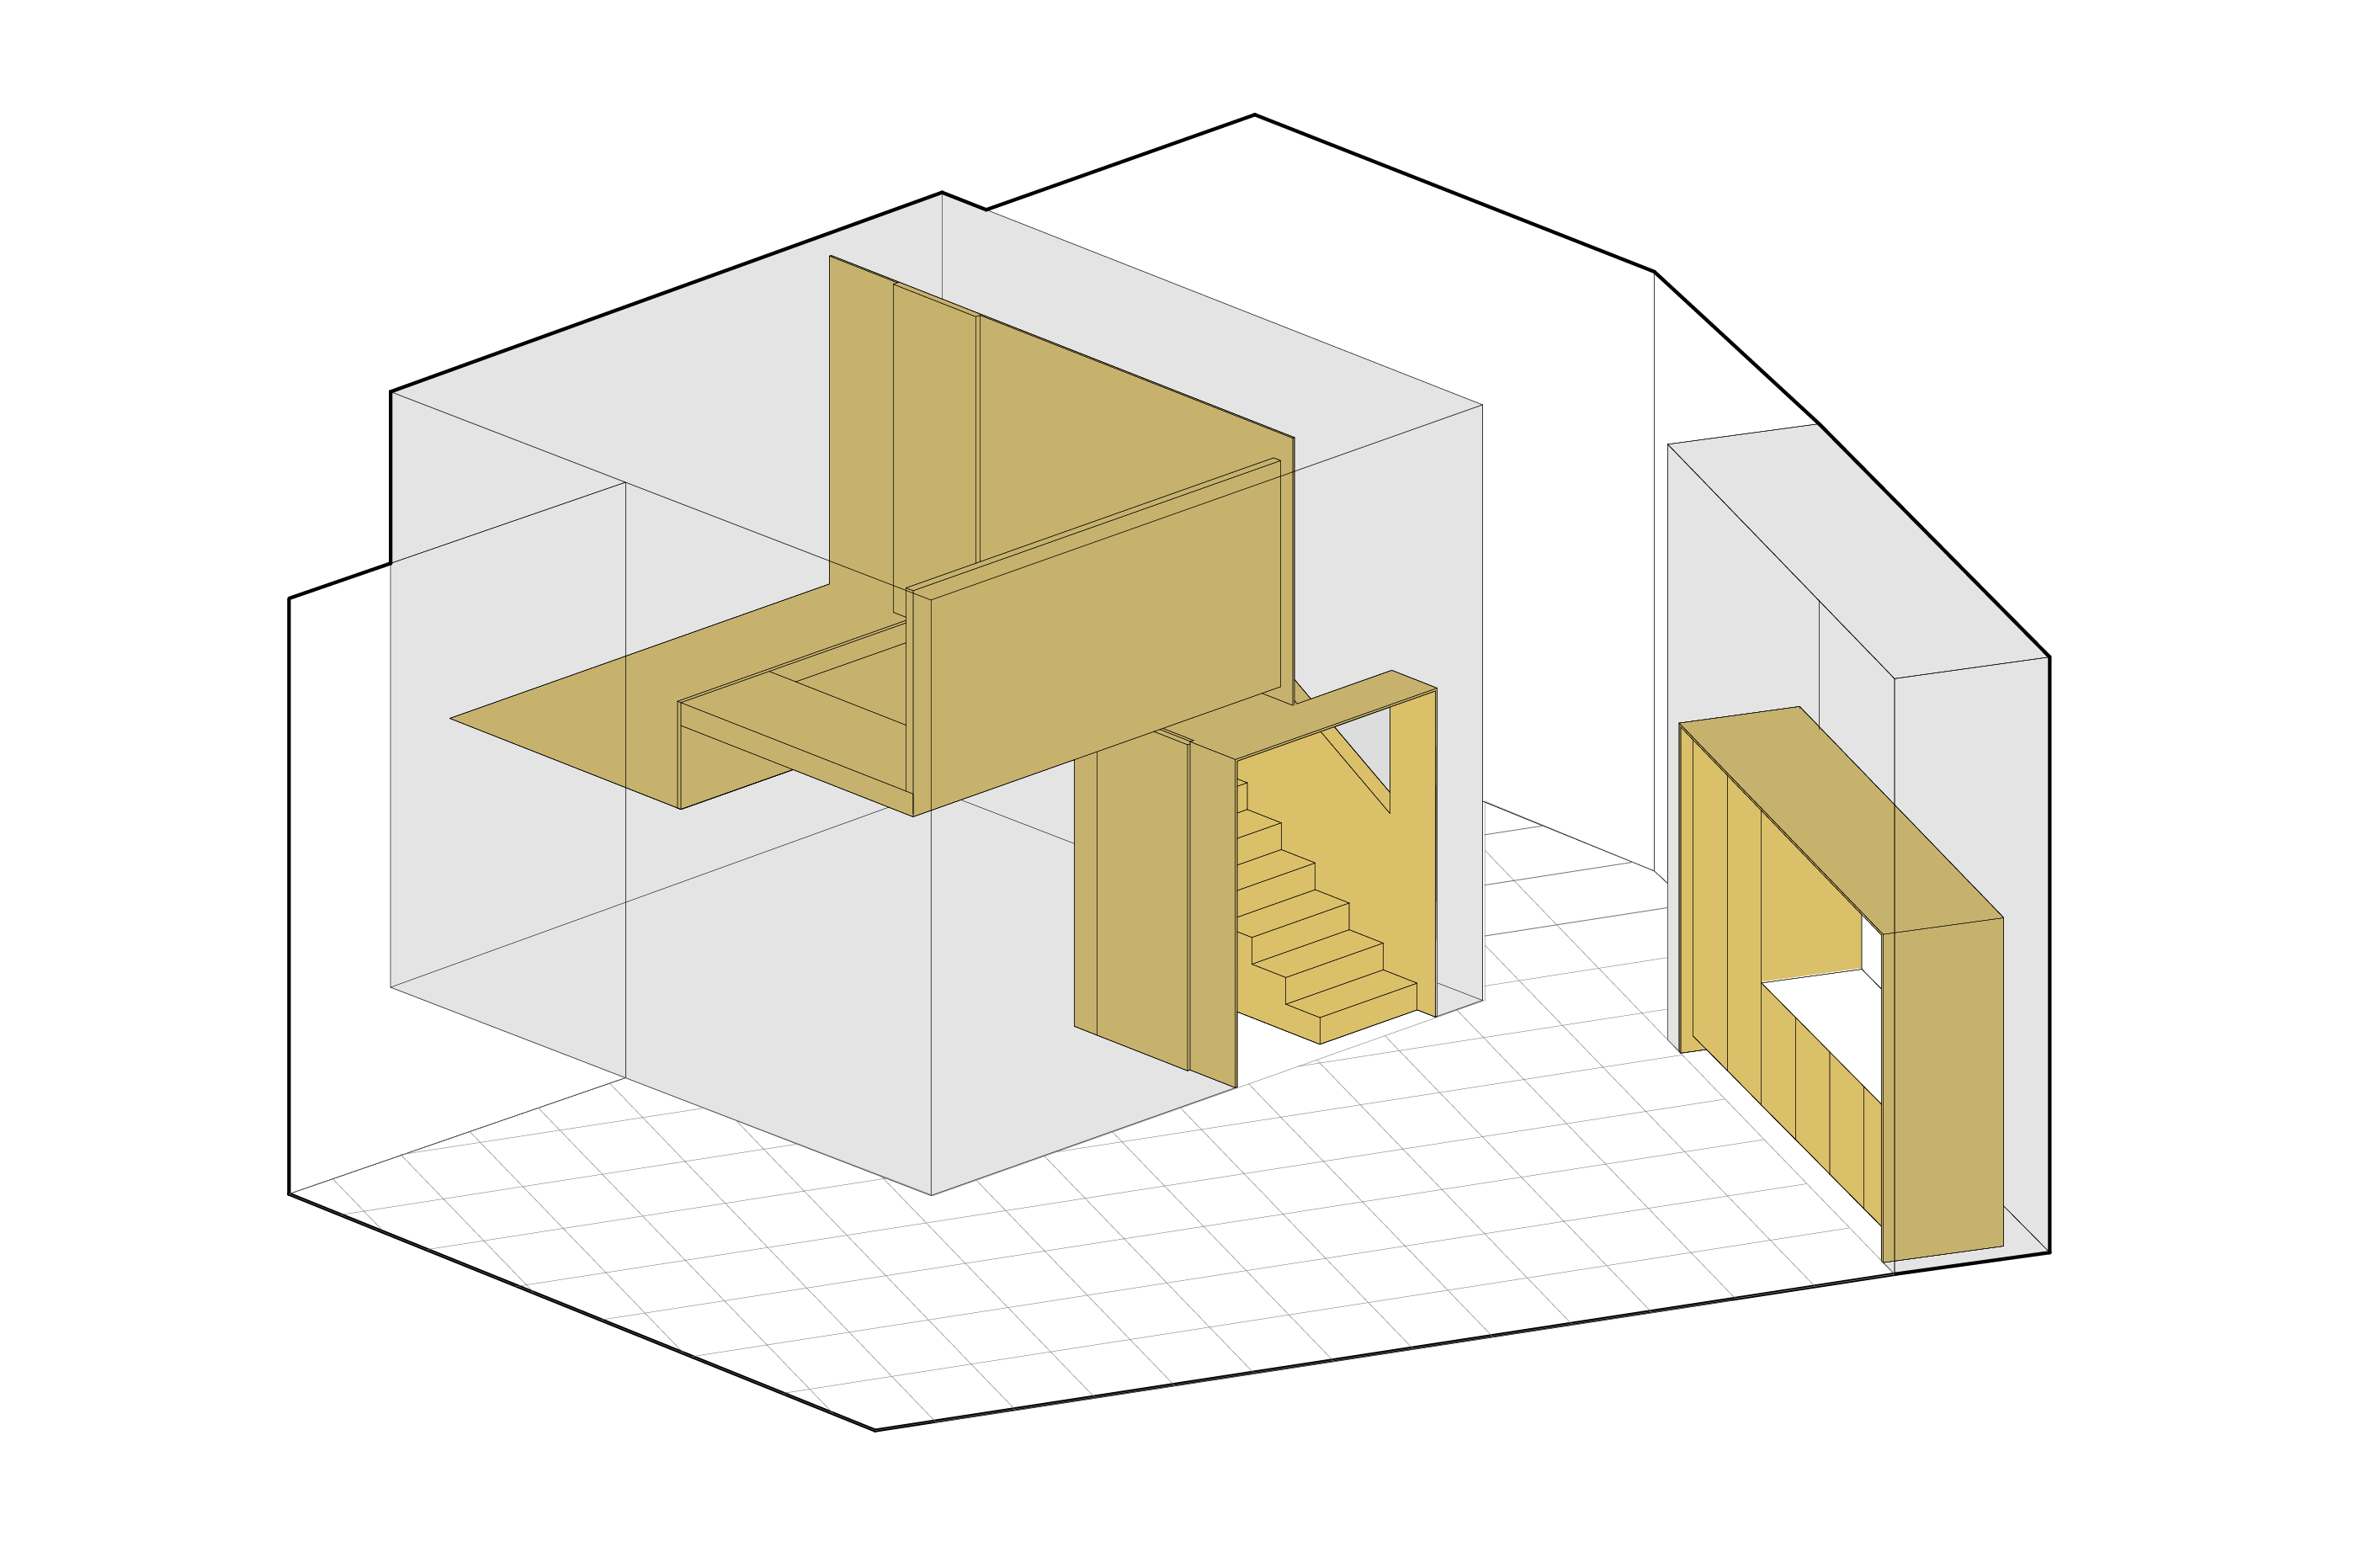 Architectural Diagrams: 10 Clever Storage Solutions for Tiny